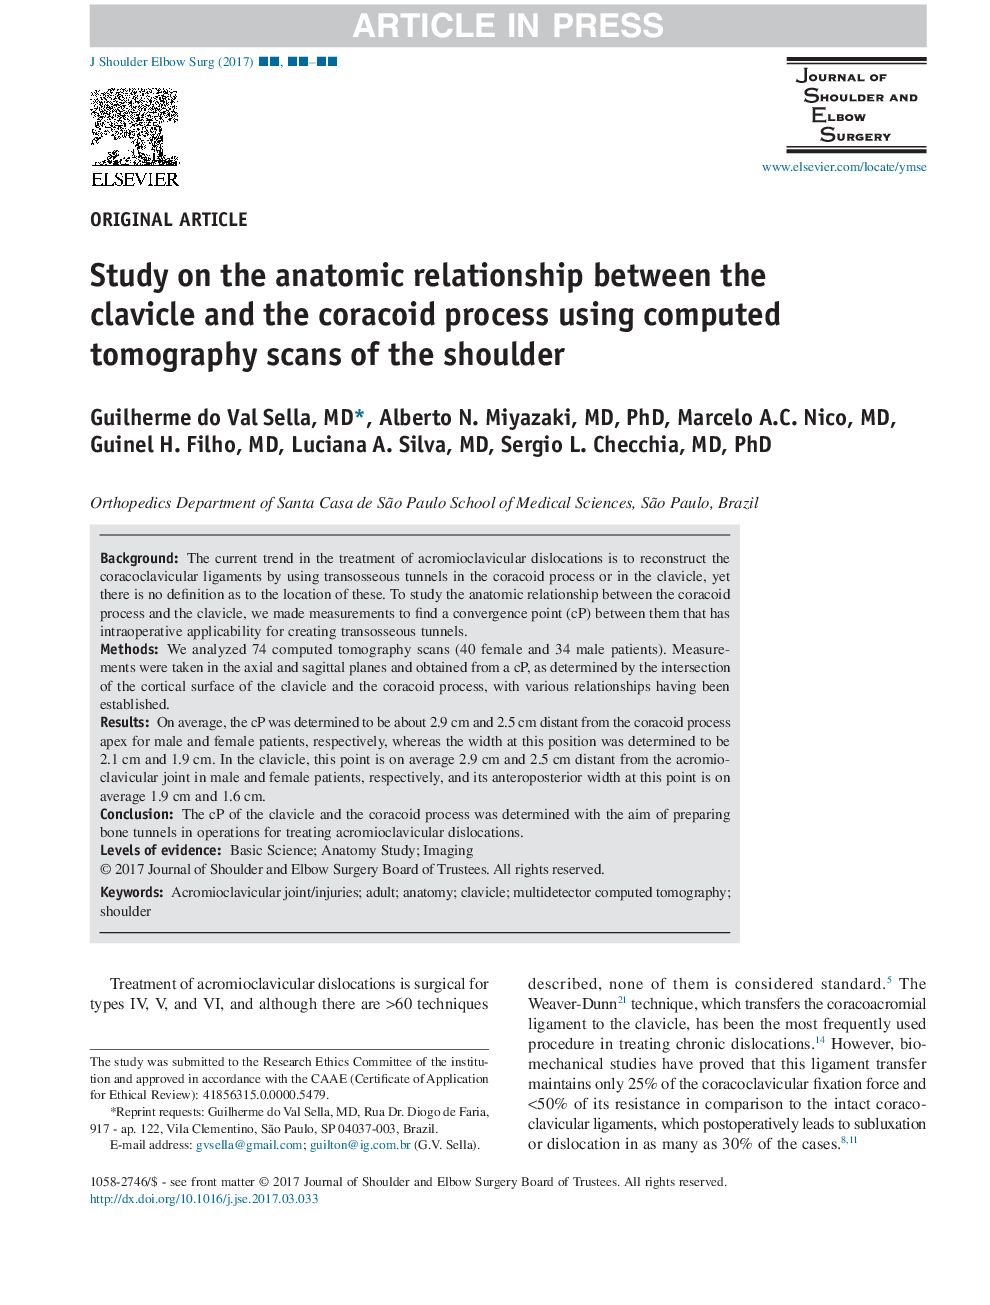 Study on the anatomic relationship between the clavicle and the coracoid process using computed tomography scans of the shoulder